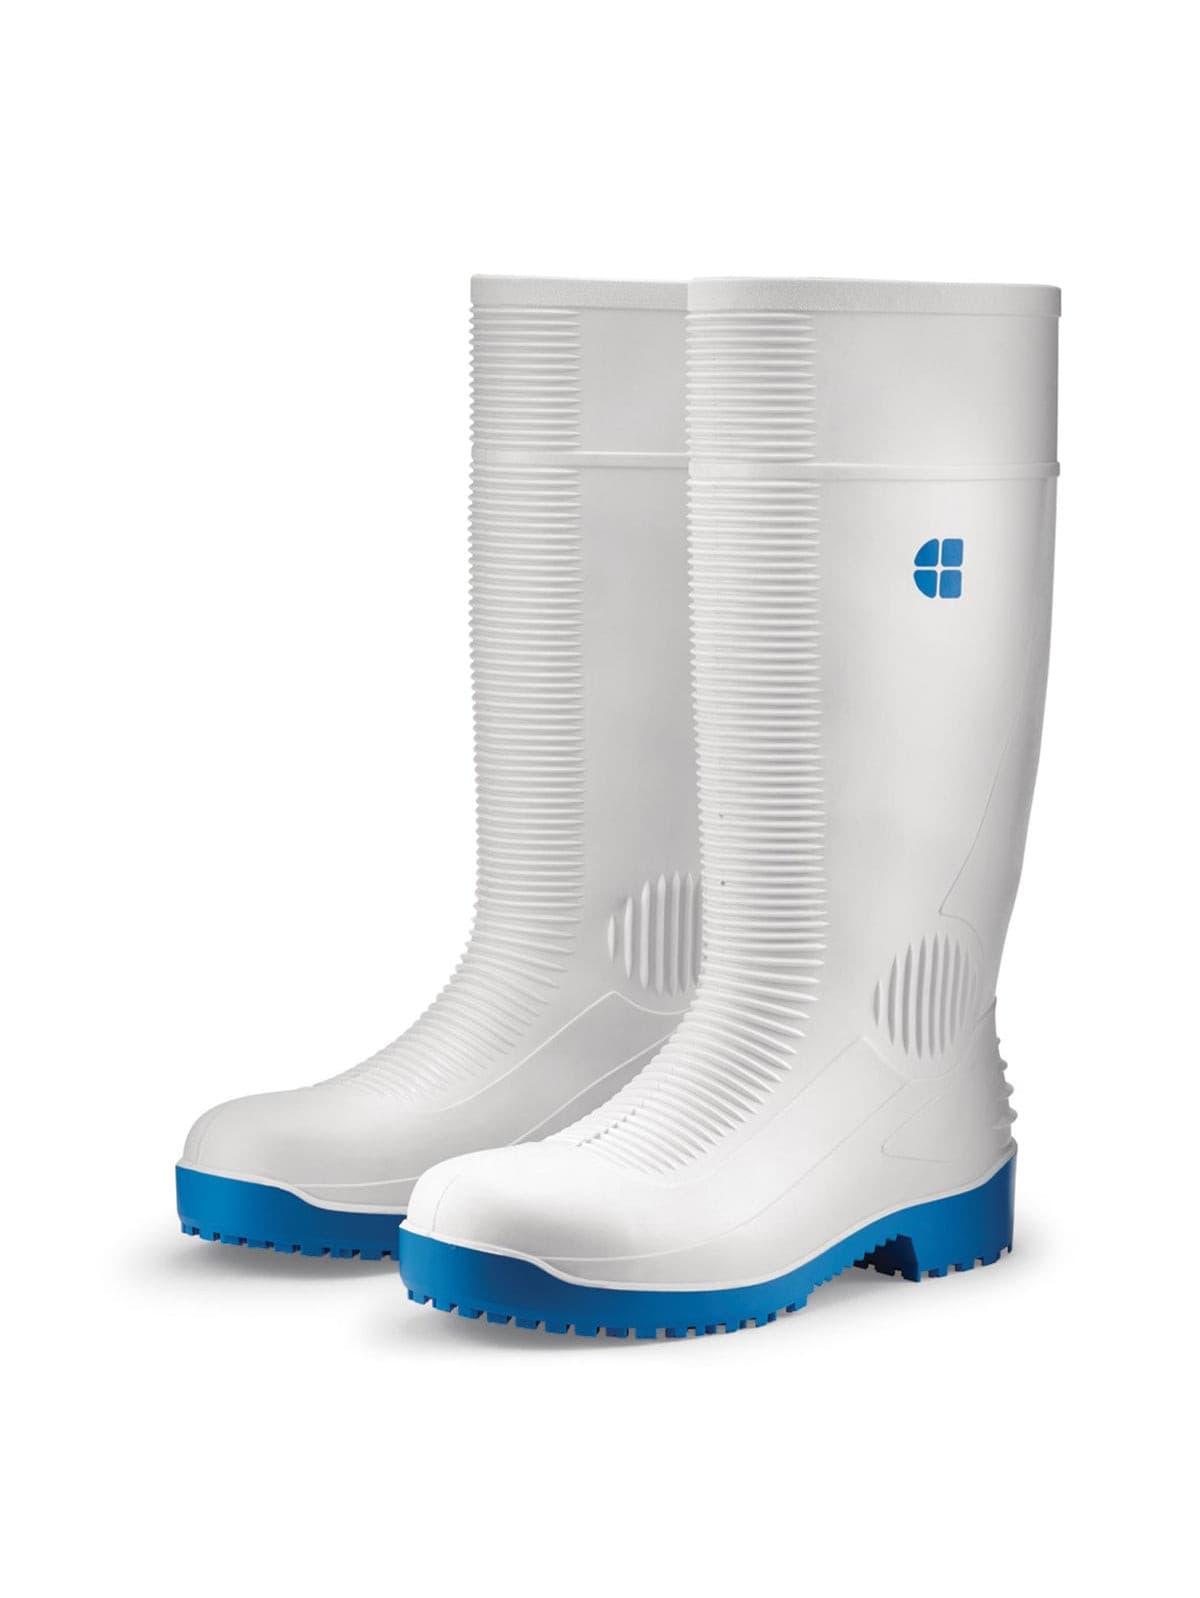 Unisex Safety Boot Bastion White (S4) by  Shoes For Crews.